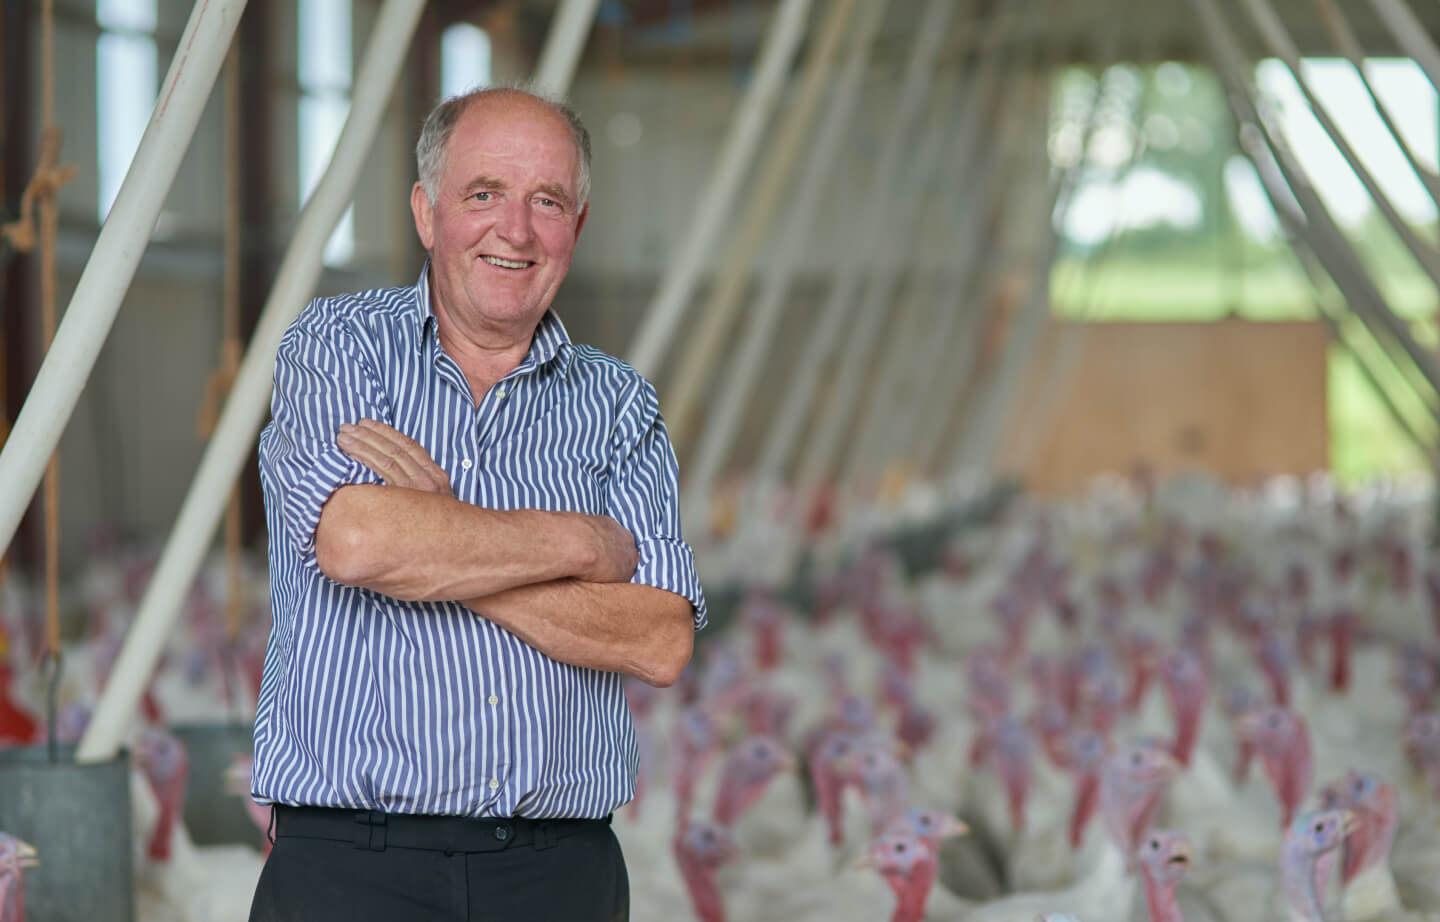 A farmer standing in a poultry barn